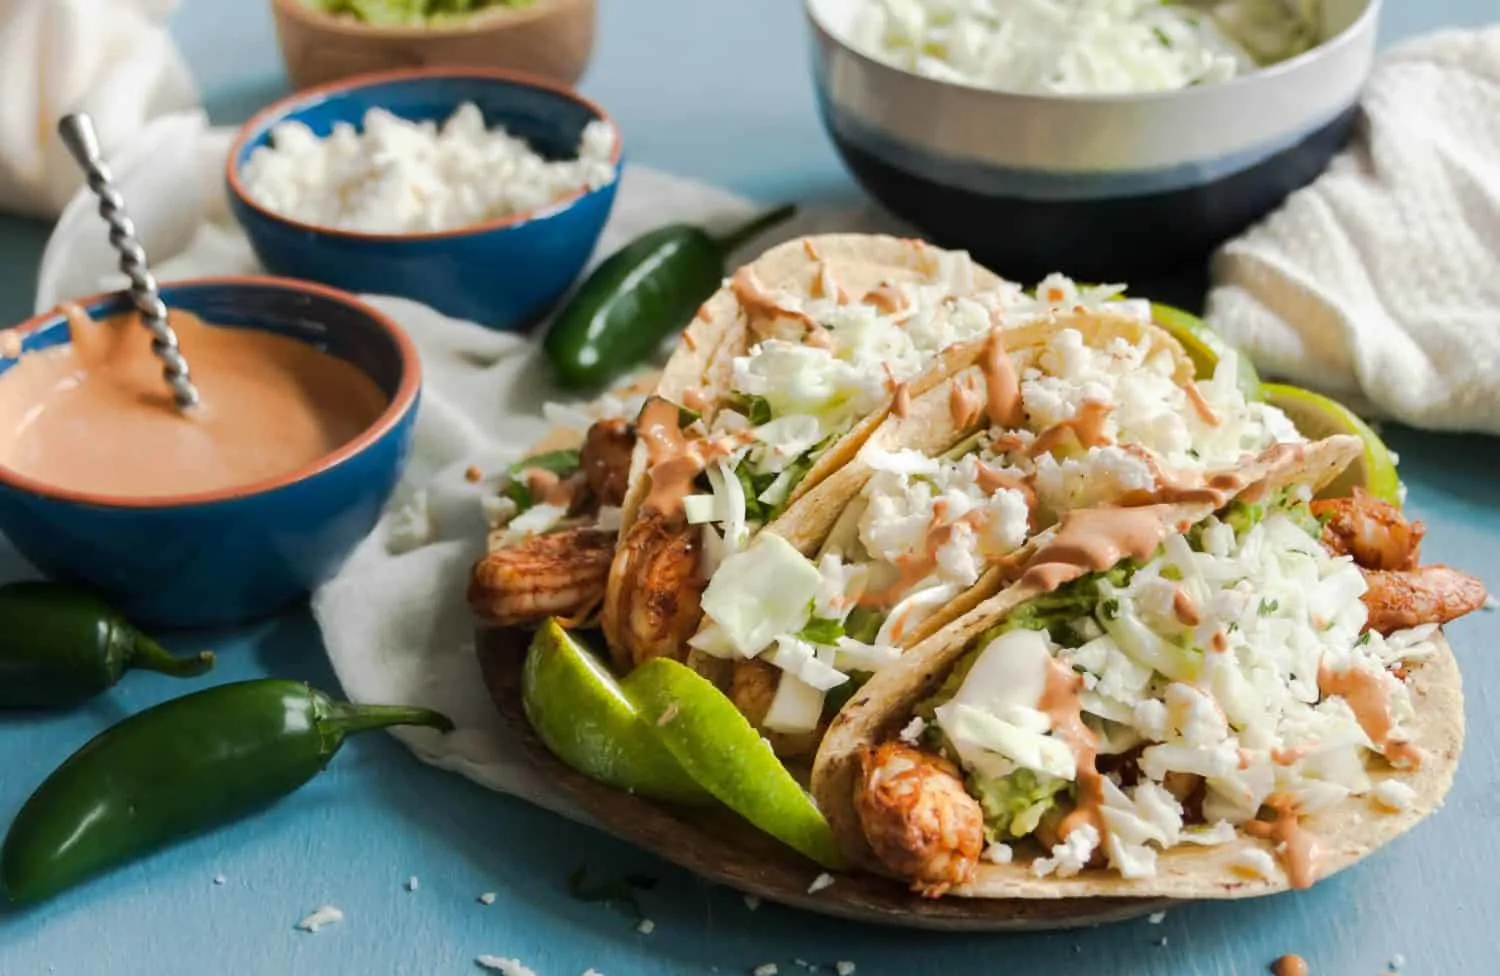 Whether you make them indoors on a grill pan or fire up the outdoor grill, these grilled shrimp tacos put you in a beach state of mind no matter the weather. * Recipe on GoodieGodmother.com